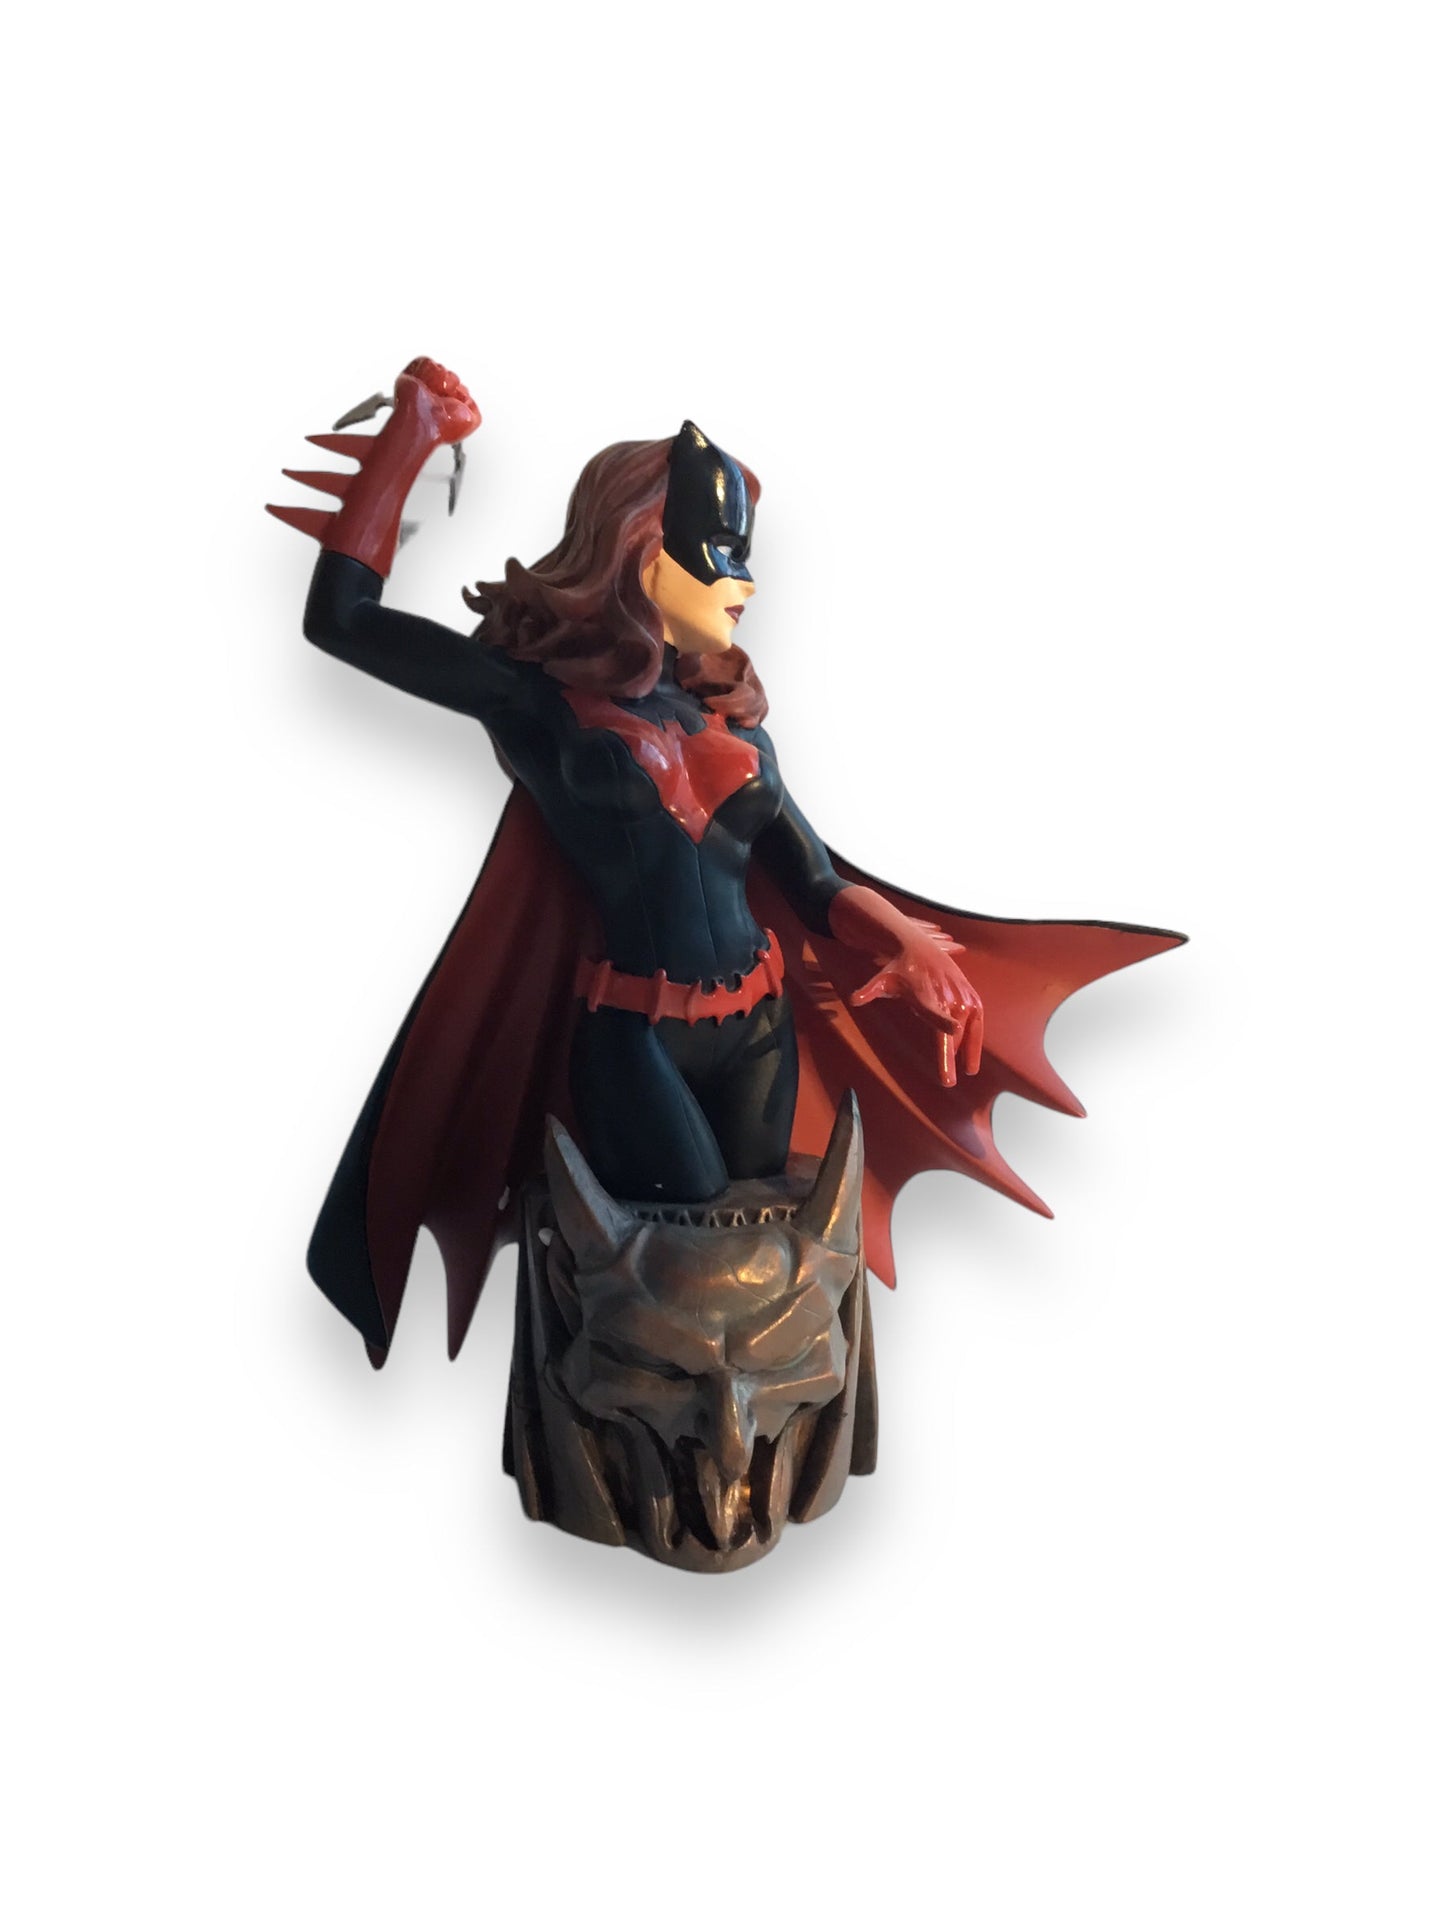 Batwoman Bust - Women of the DC Universe Statue by Terry Dodson - DC Direct 238/4000